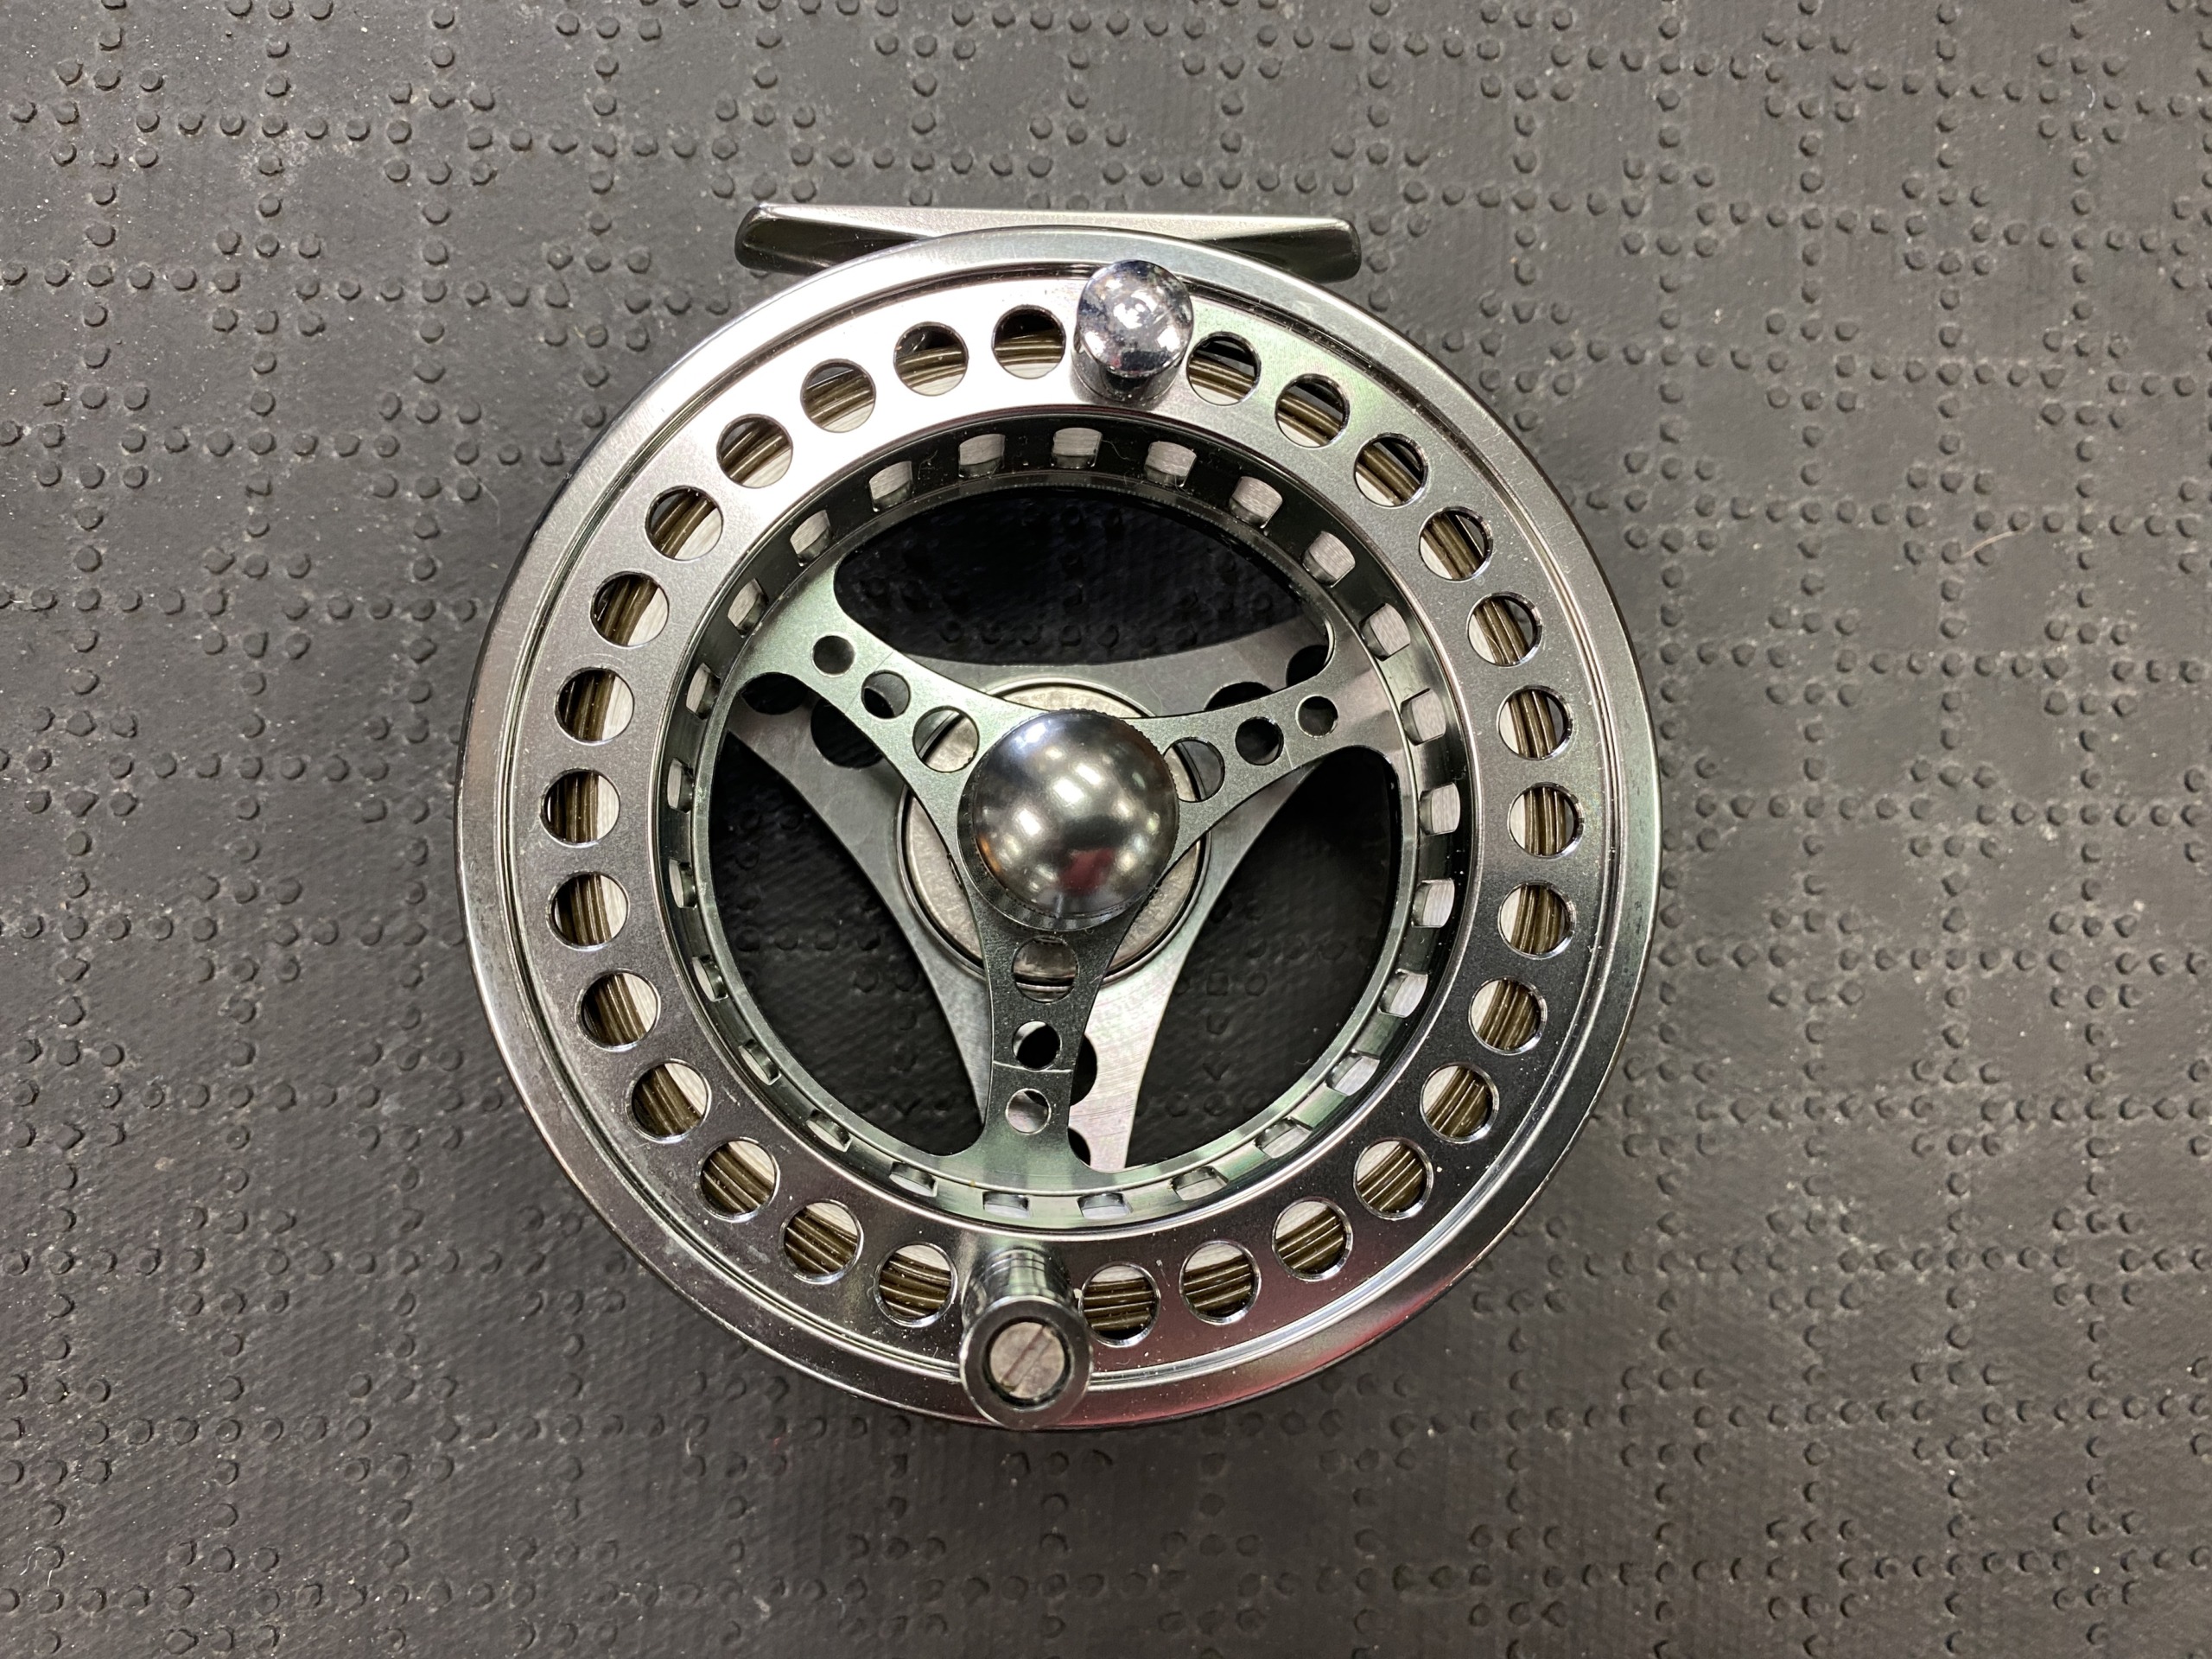 Goture Fly Fishing Reel - 9/10 - CNC Machined Large Arbor Fishing Reel - C/W RIO Type 3 Sinking Fly Line - LIKE NEW! - $100